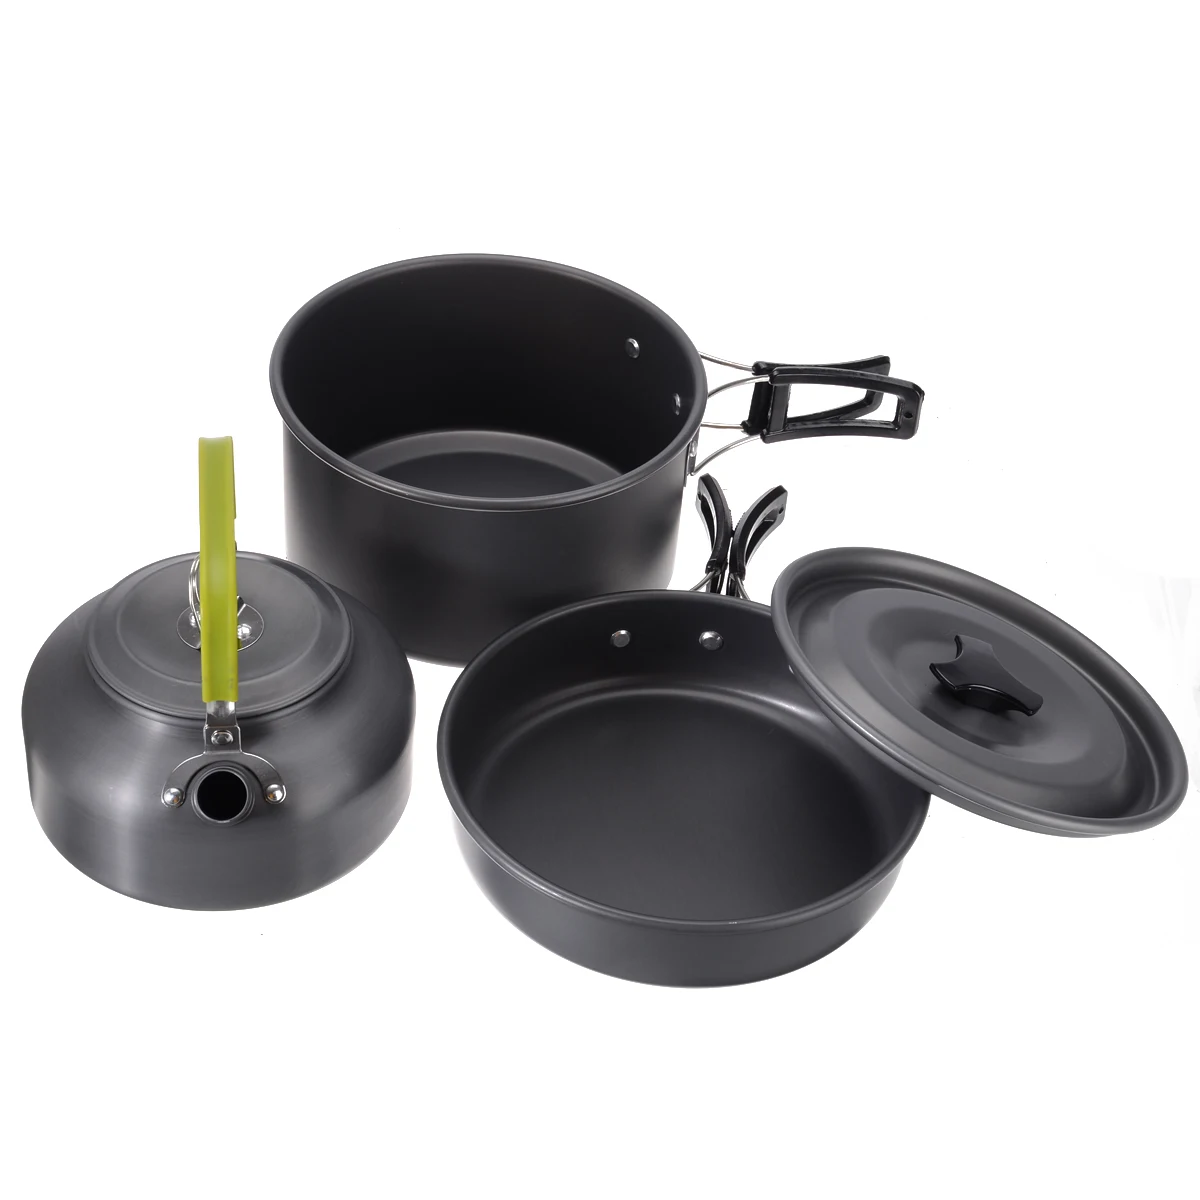 Camping Cookware Cooking Pots Frying Pan Set + Kettle 2-3 Person Utensils Outdoor Tableware